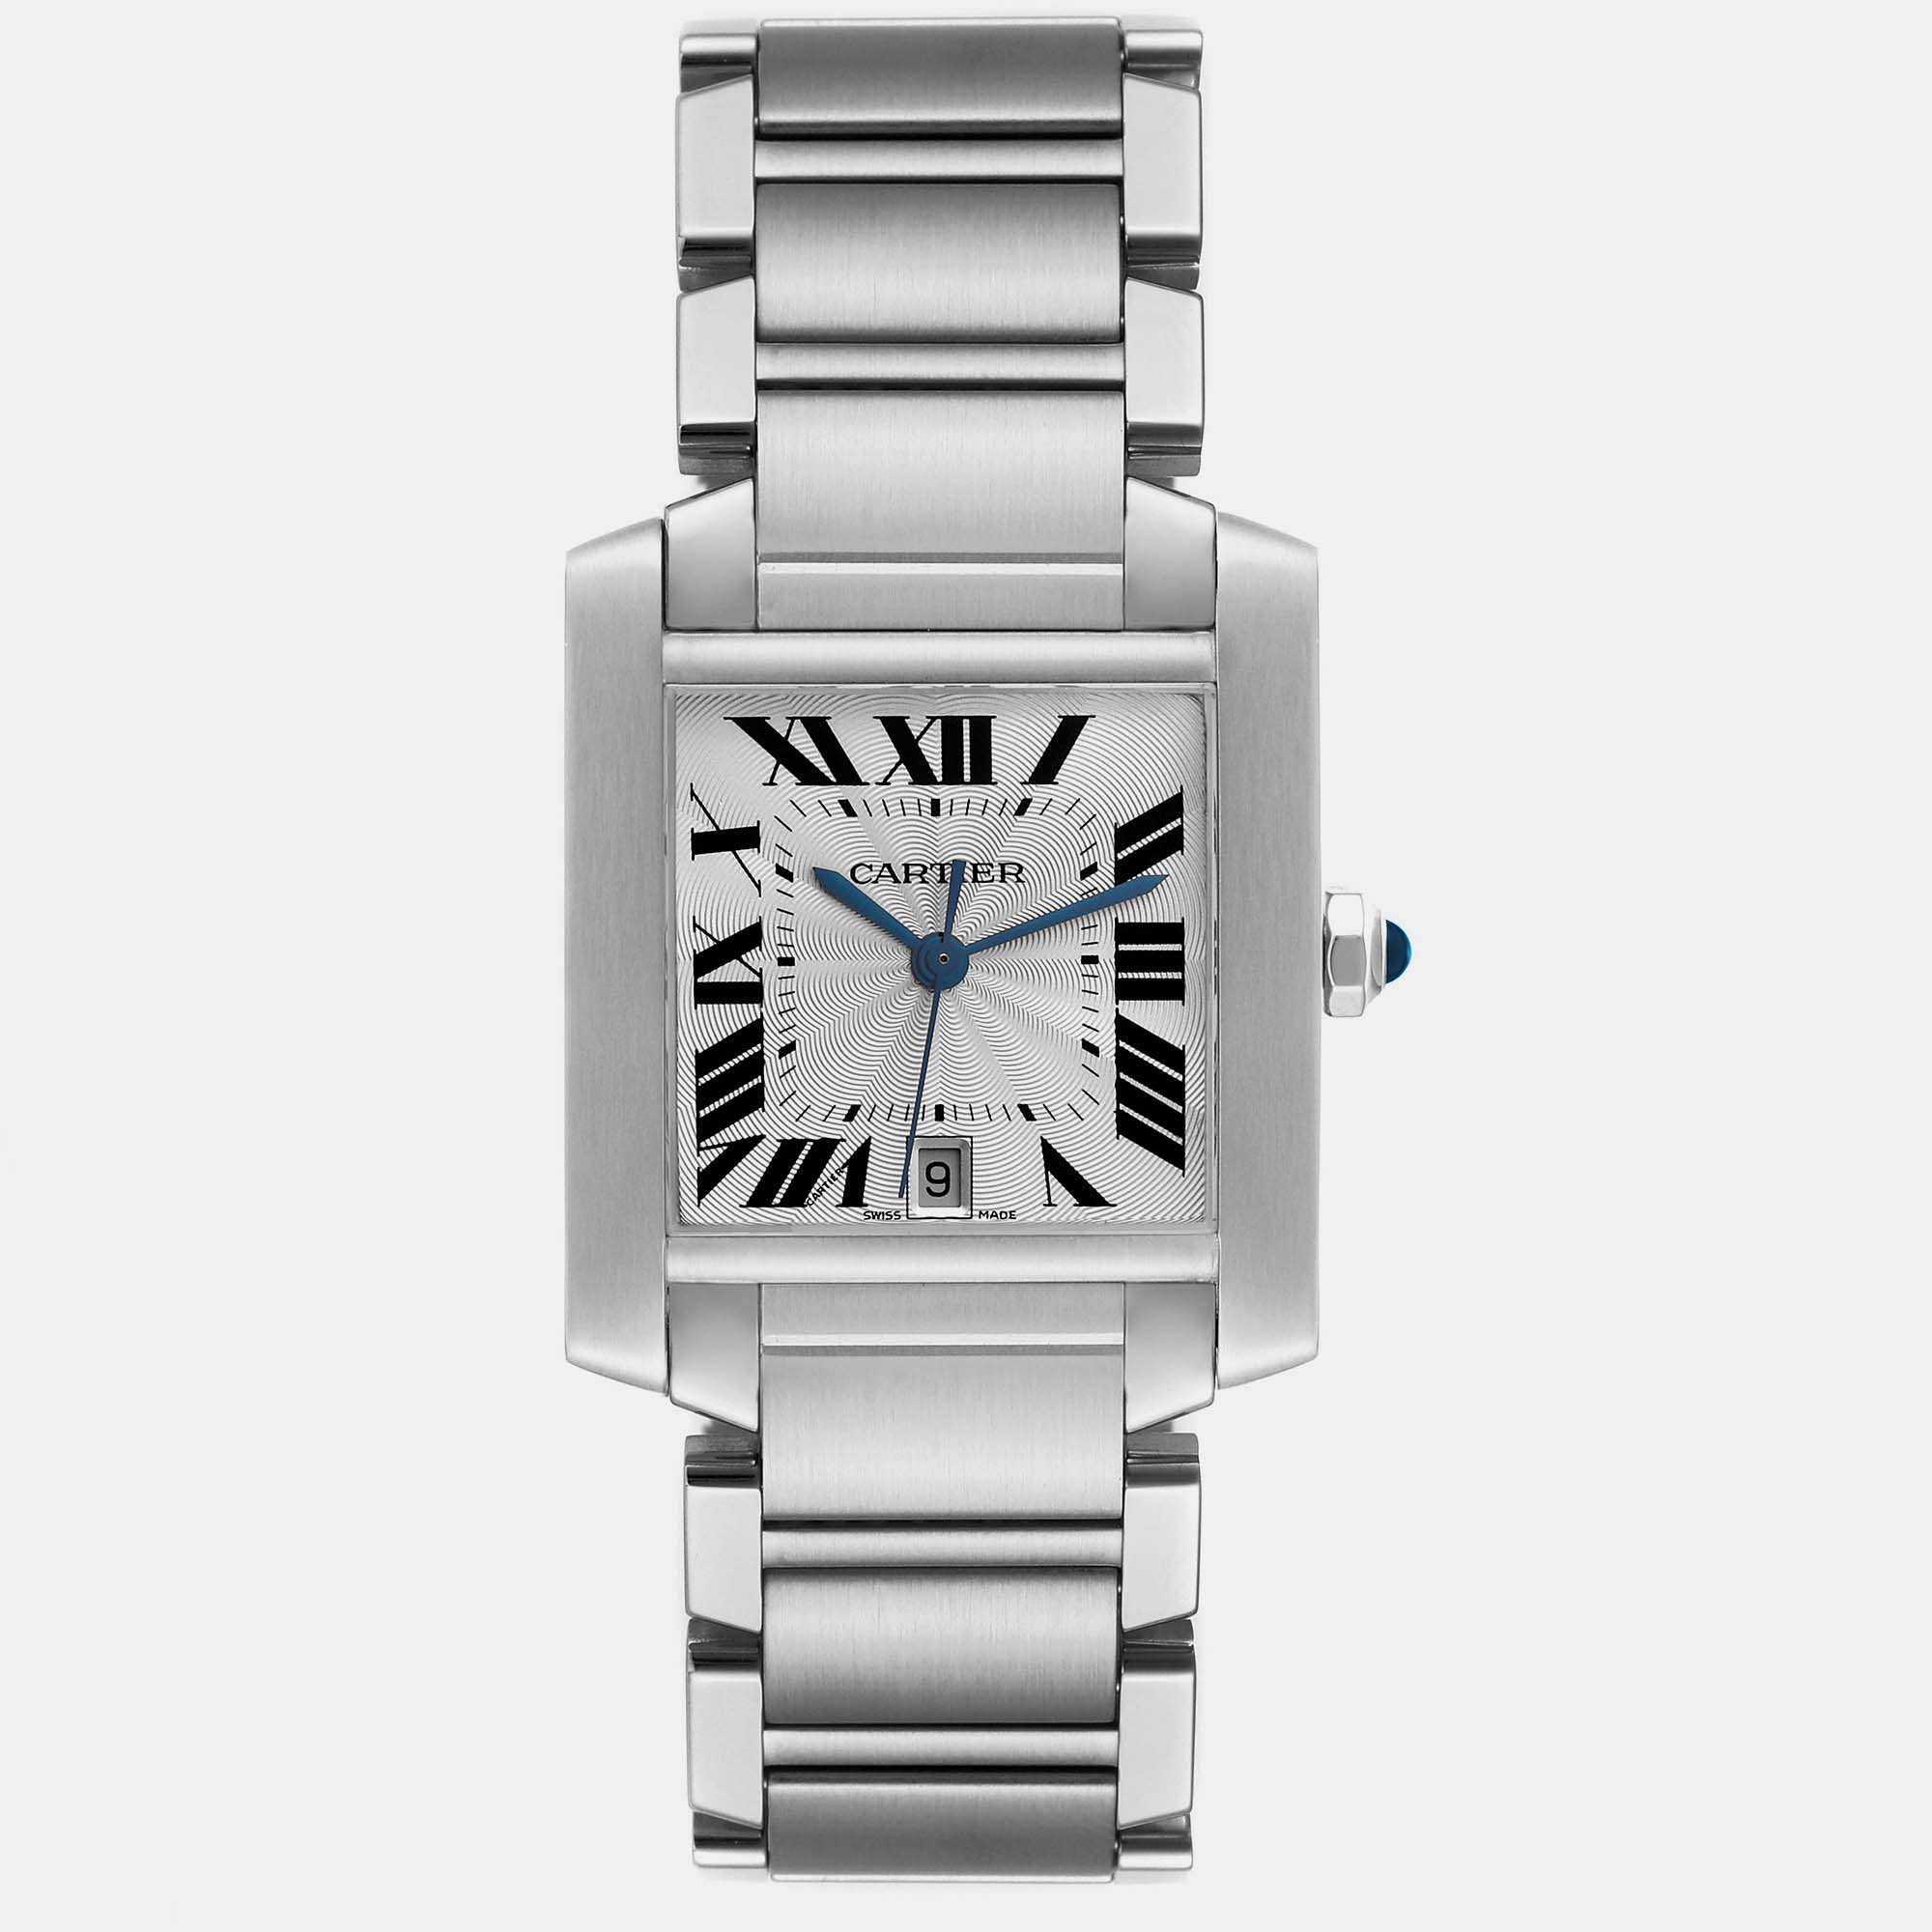 Cartier tank francaise large automatic steel men's watch 28 mm